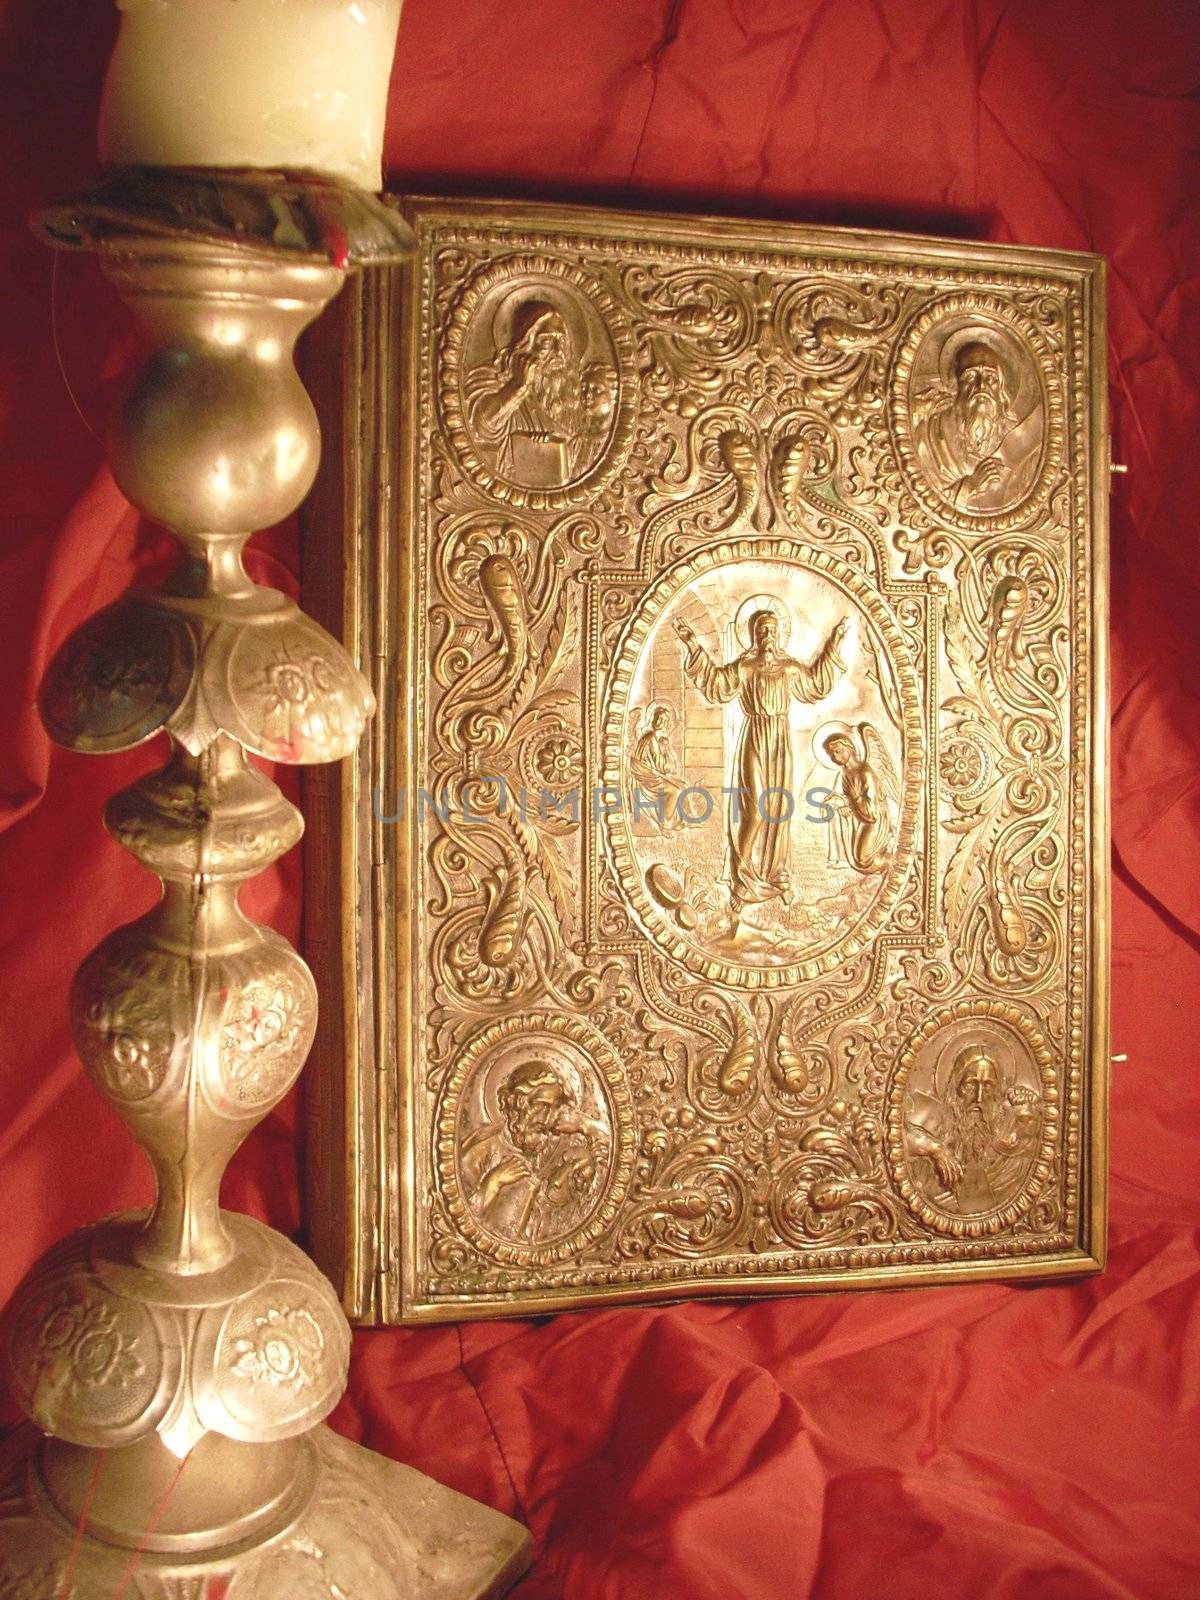 very old Bible, candlestick and icons on a Red shining silk background